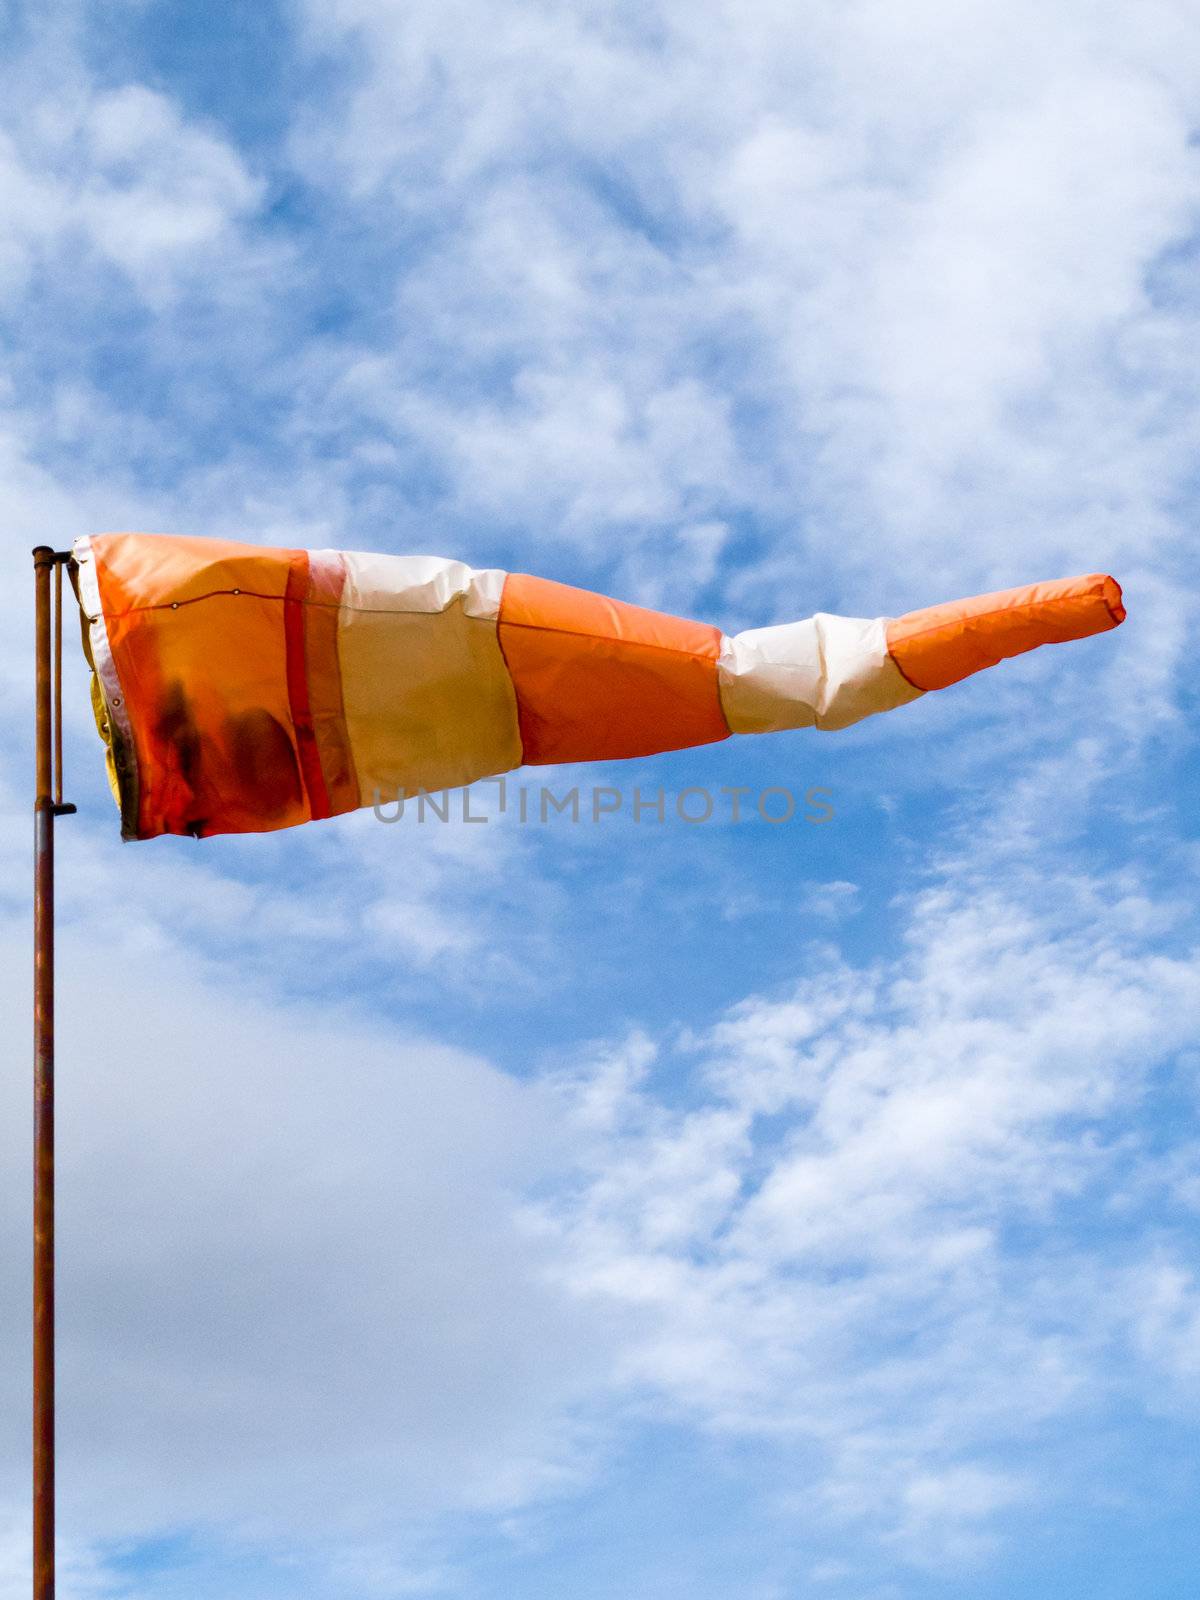 Full wind cone weather vane on windy day by PiLens